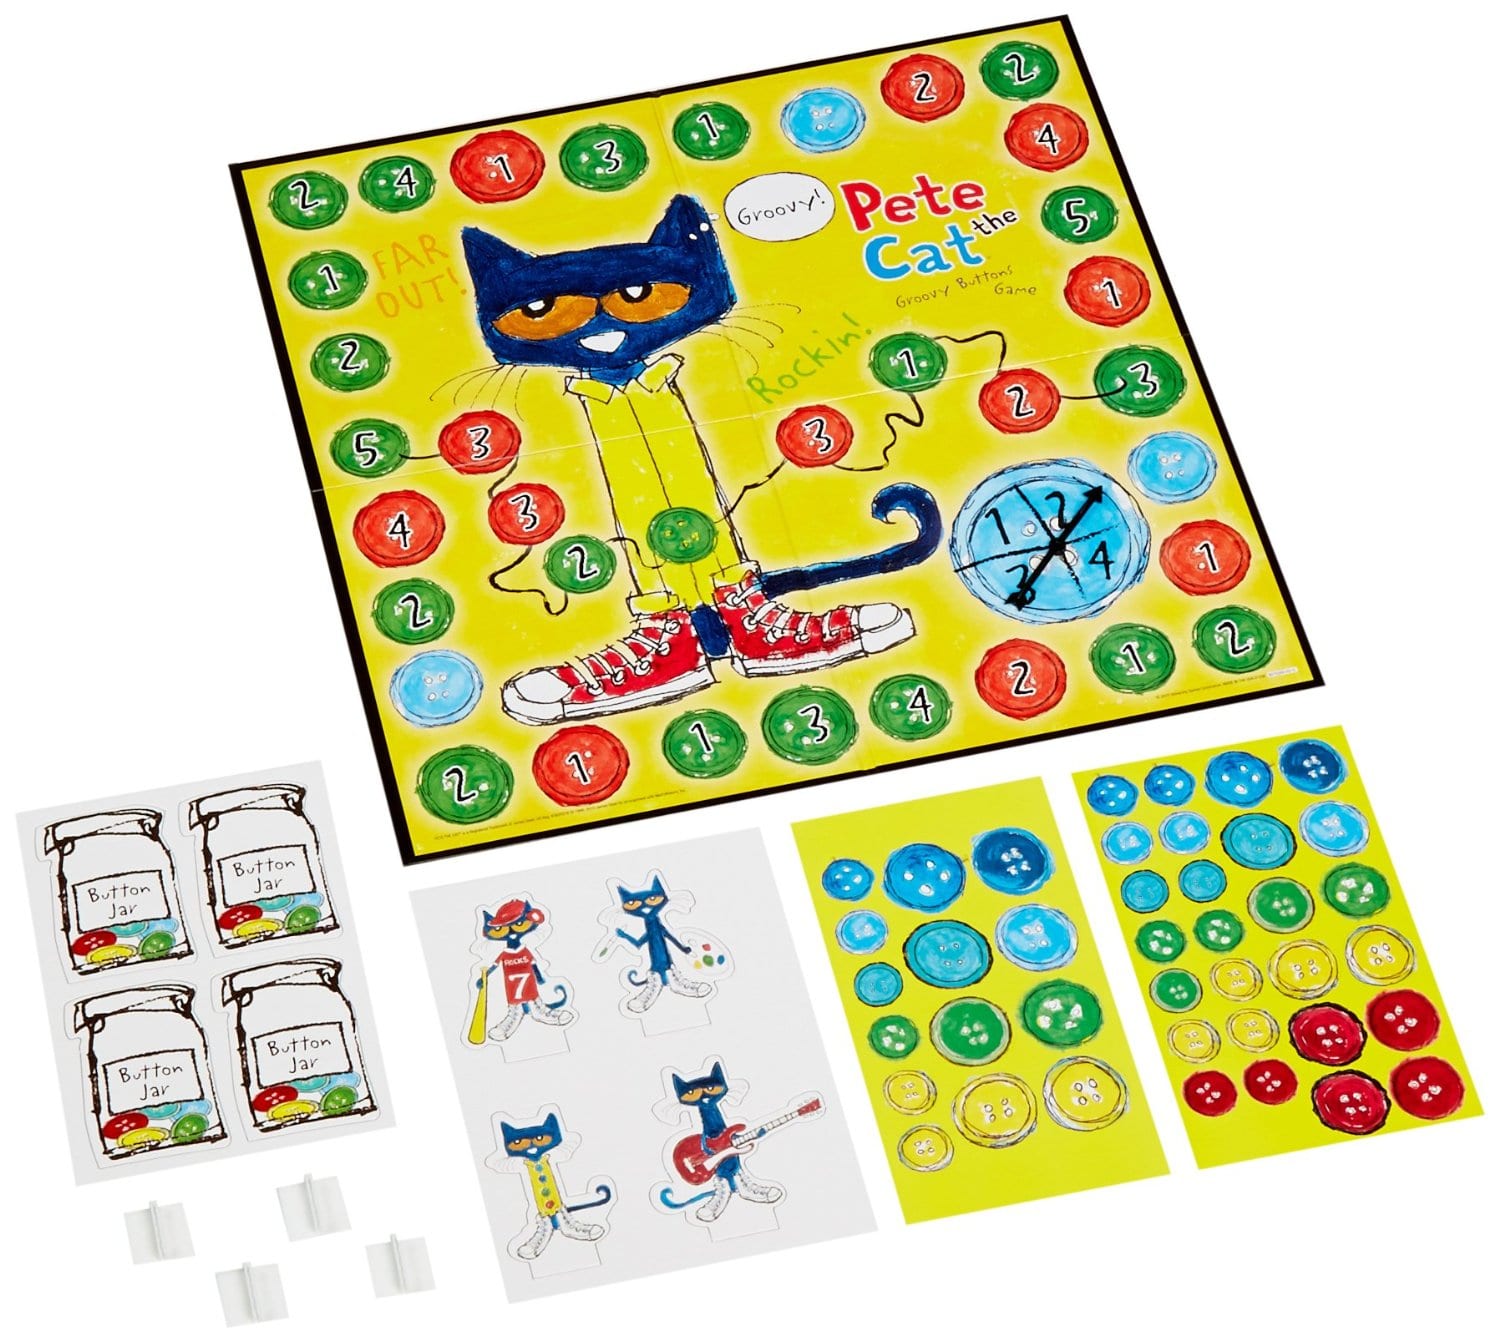 Pete the Cat Groovy Buttons Game – Therapy in a Bin1500 x 1341